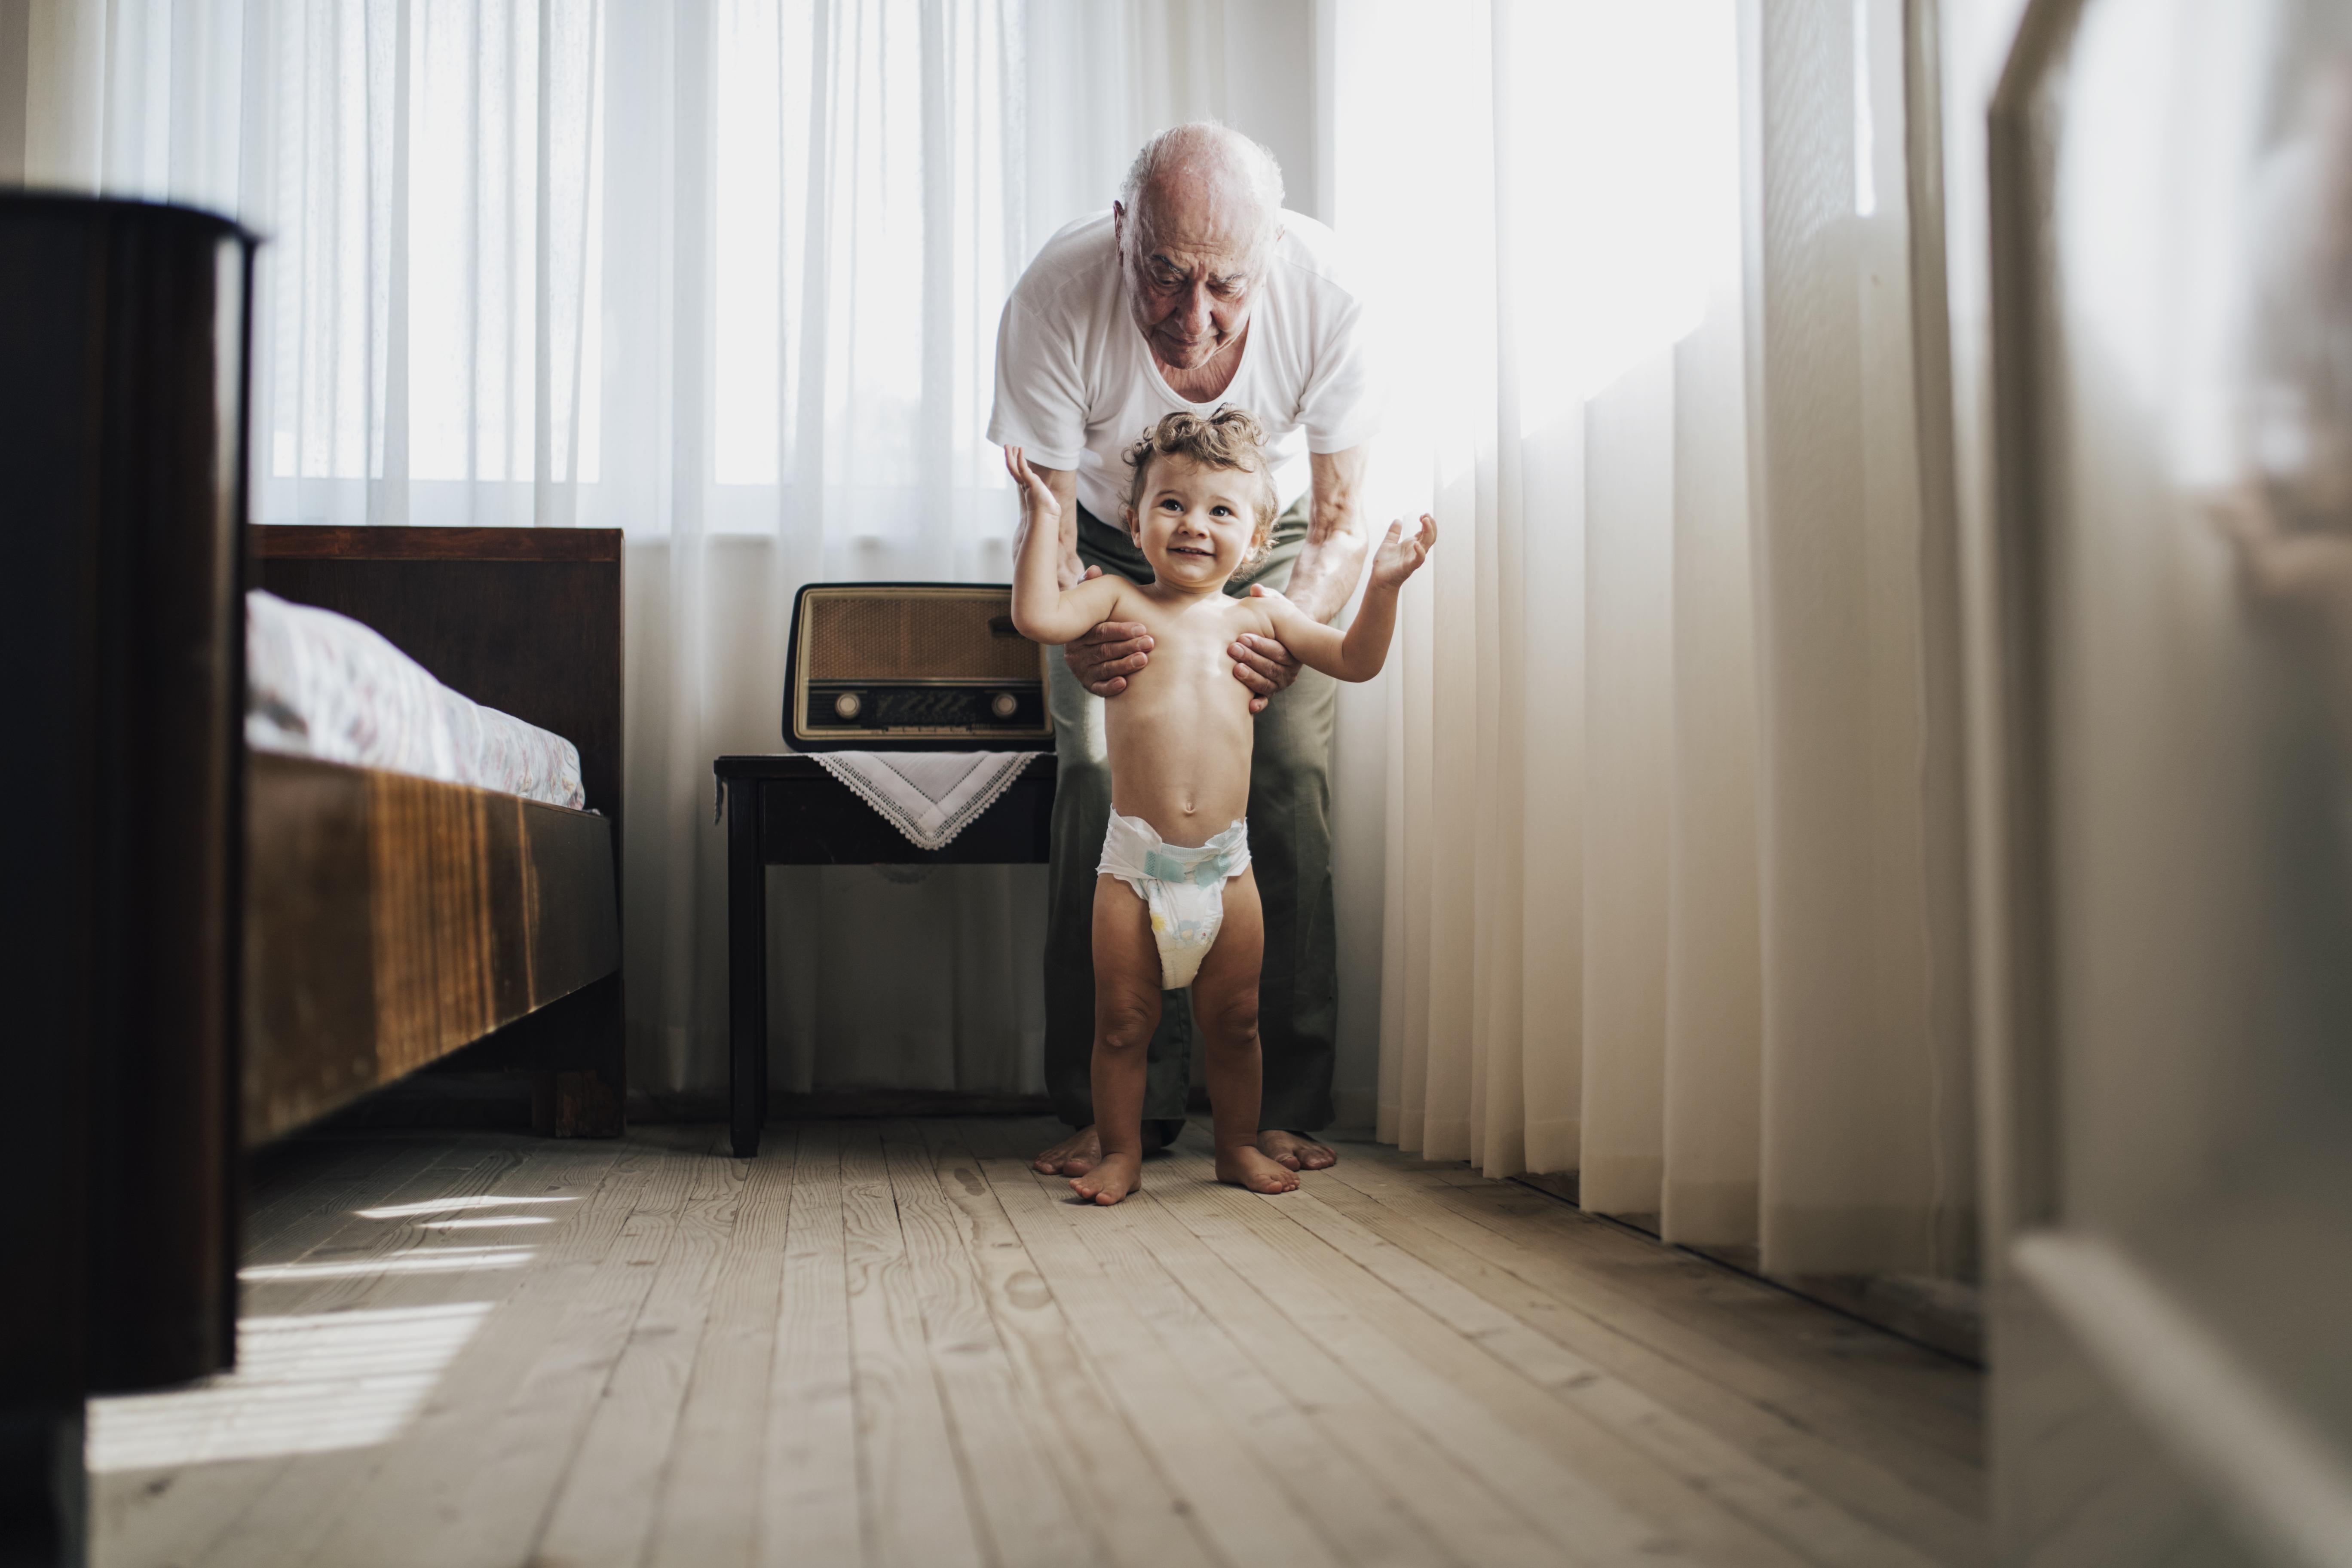 An AFib patient helps his grandson take his first steps. He is optimistic about his future after talking to an electrophysiologist (AFib Specialist) about Cardiac Catheter Ablation.